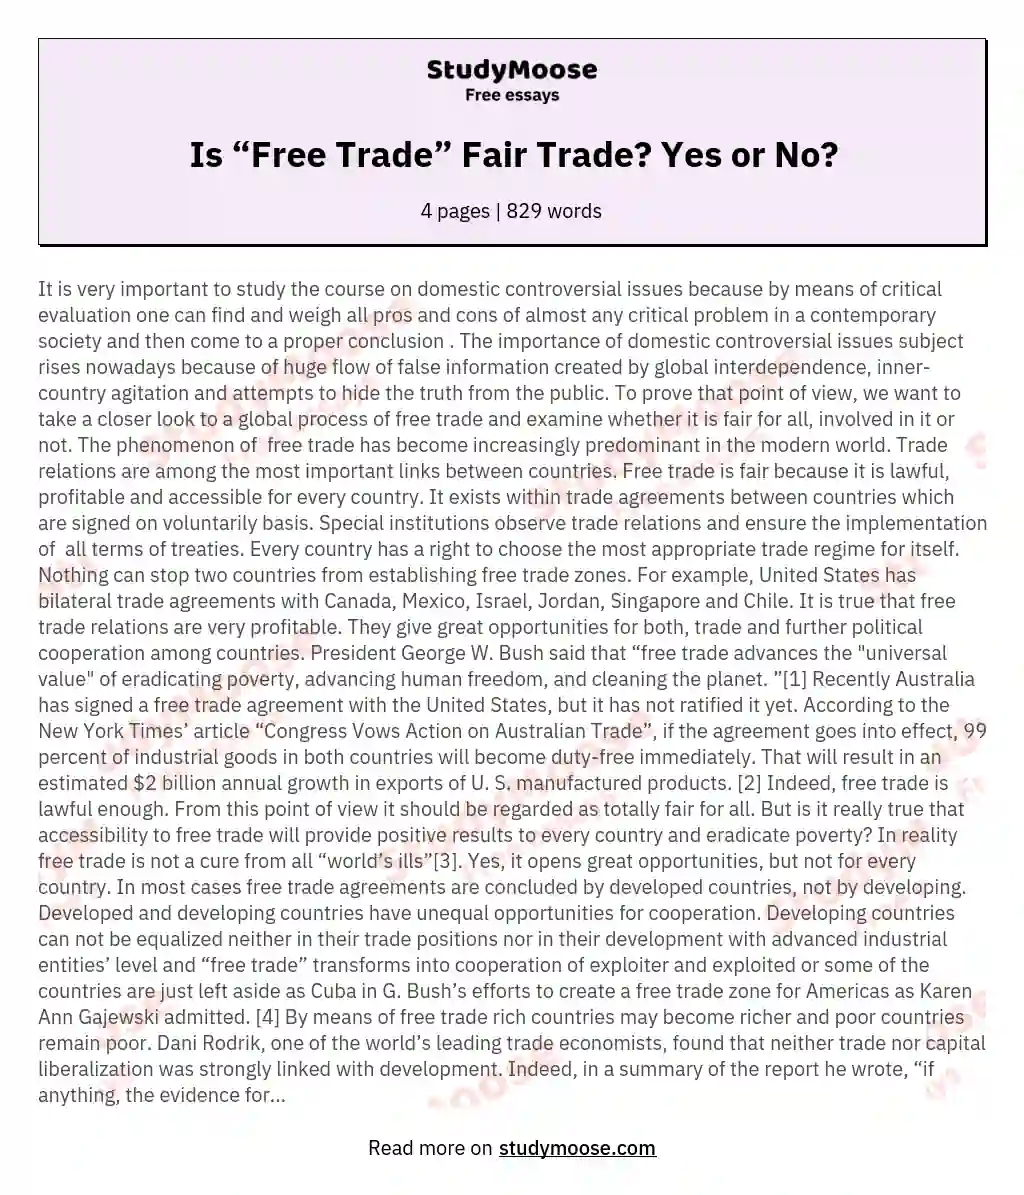 Is “Free Trade” Fair Trade? Yes or No?